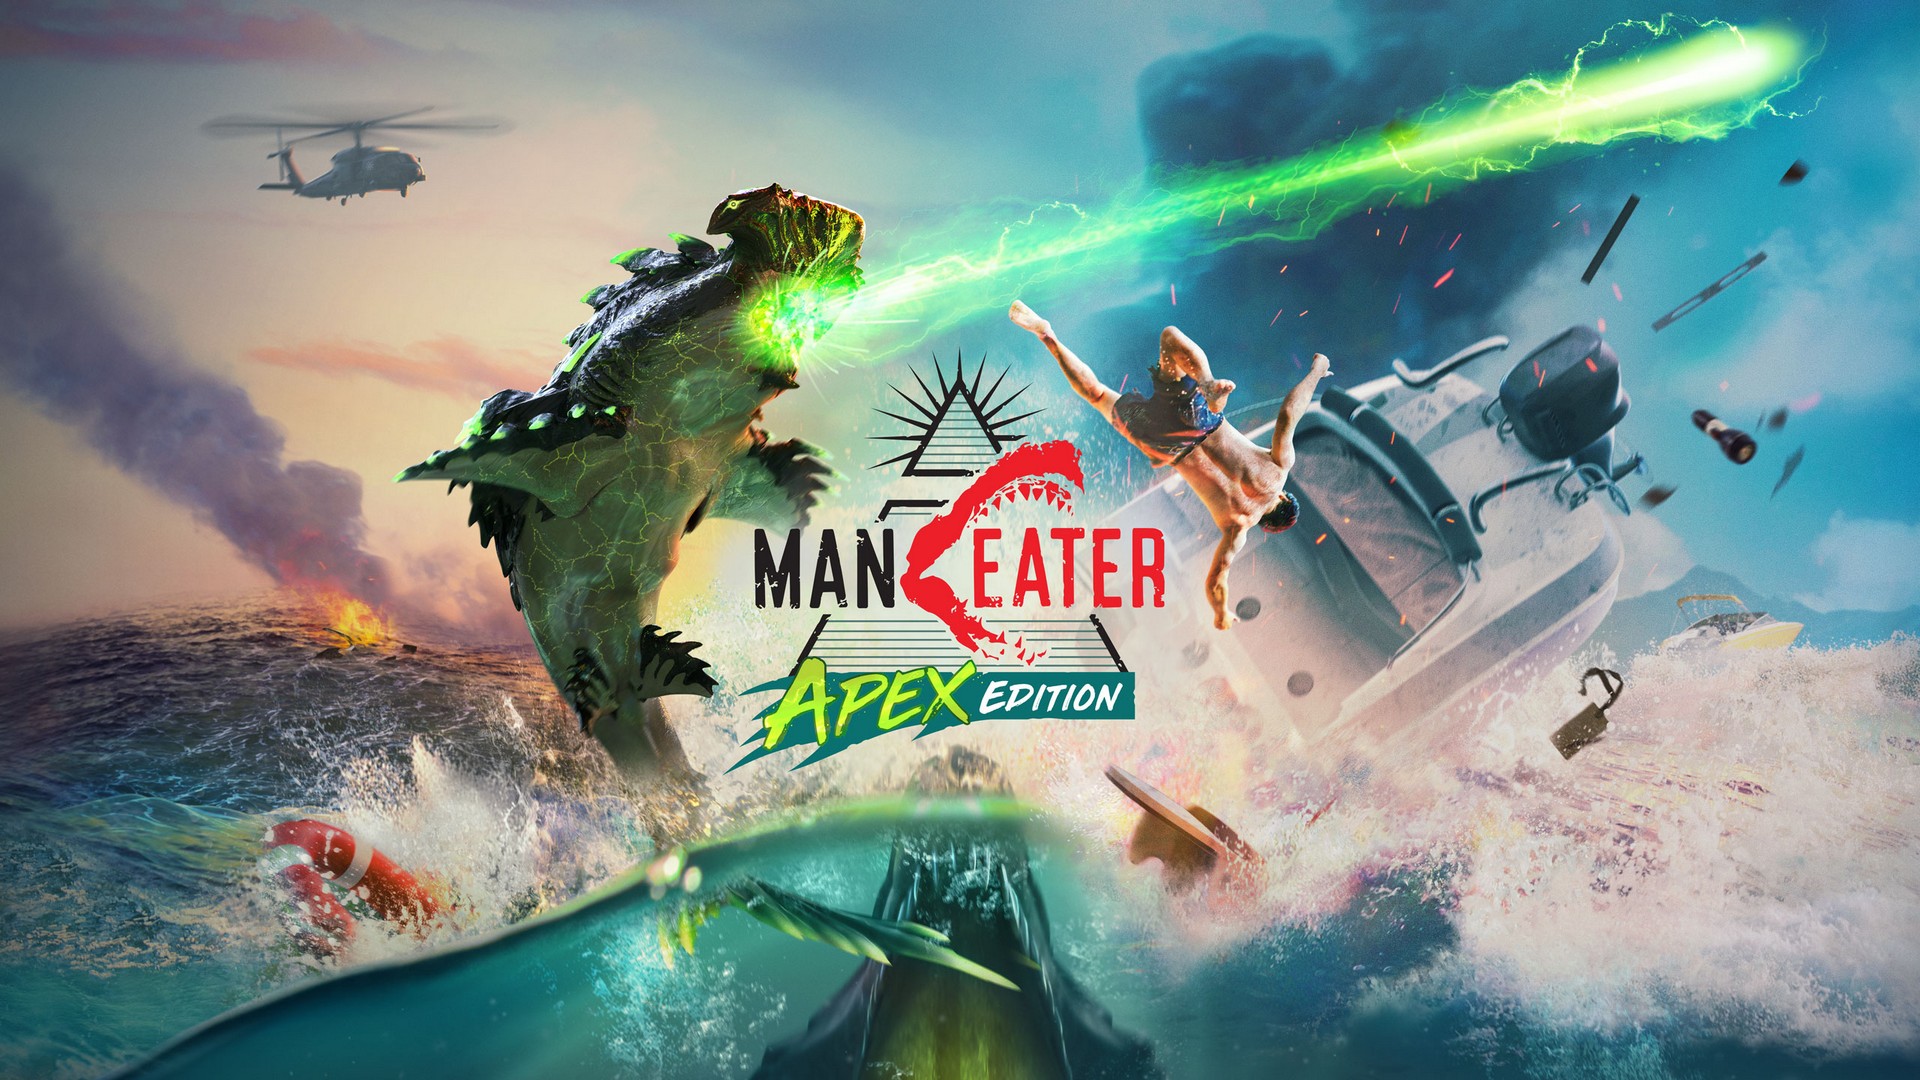 Experience True ShaRkPG Mayhem When The Maneater Apex Edition Comes To Stores